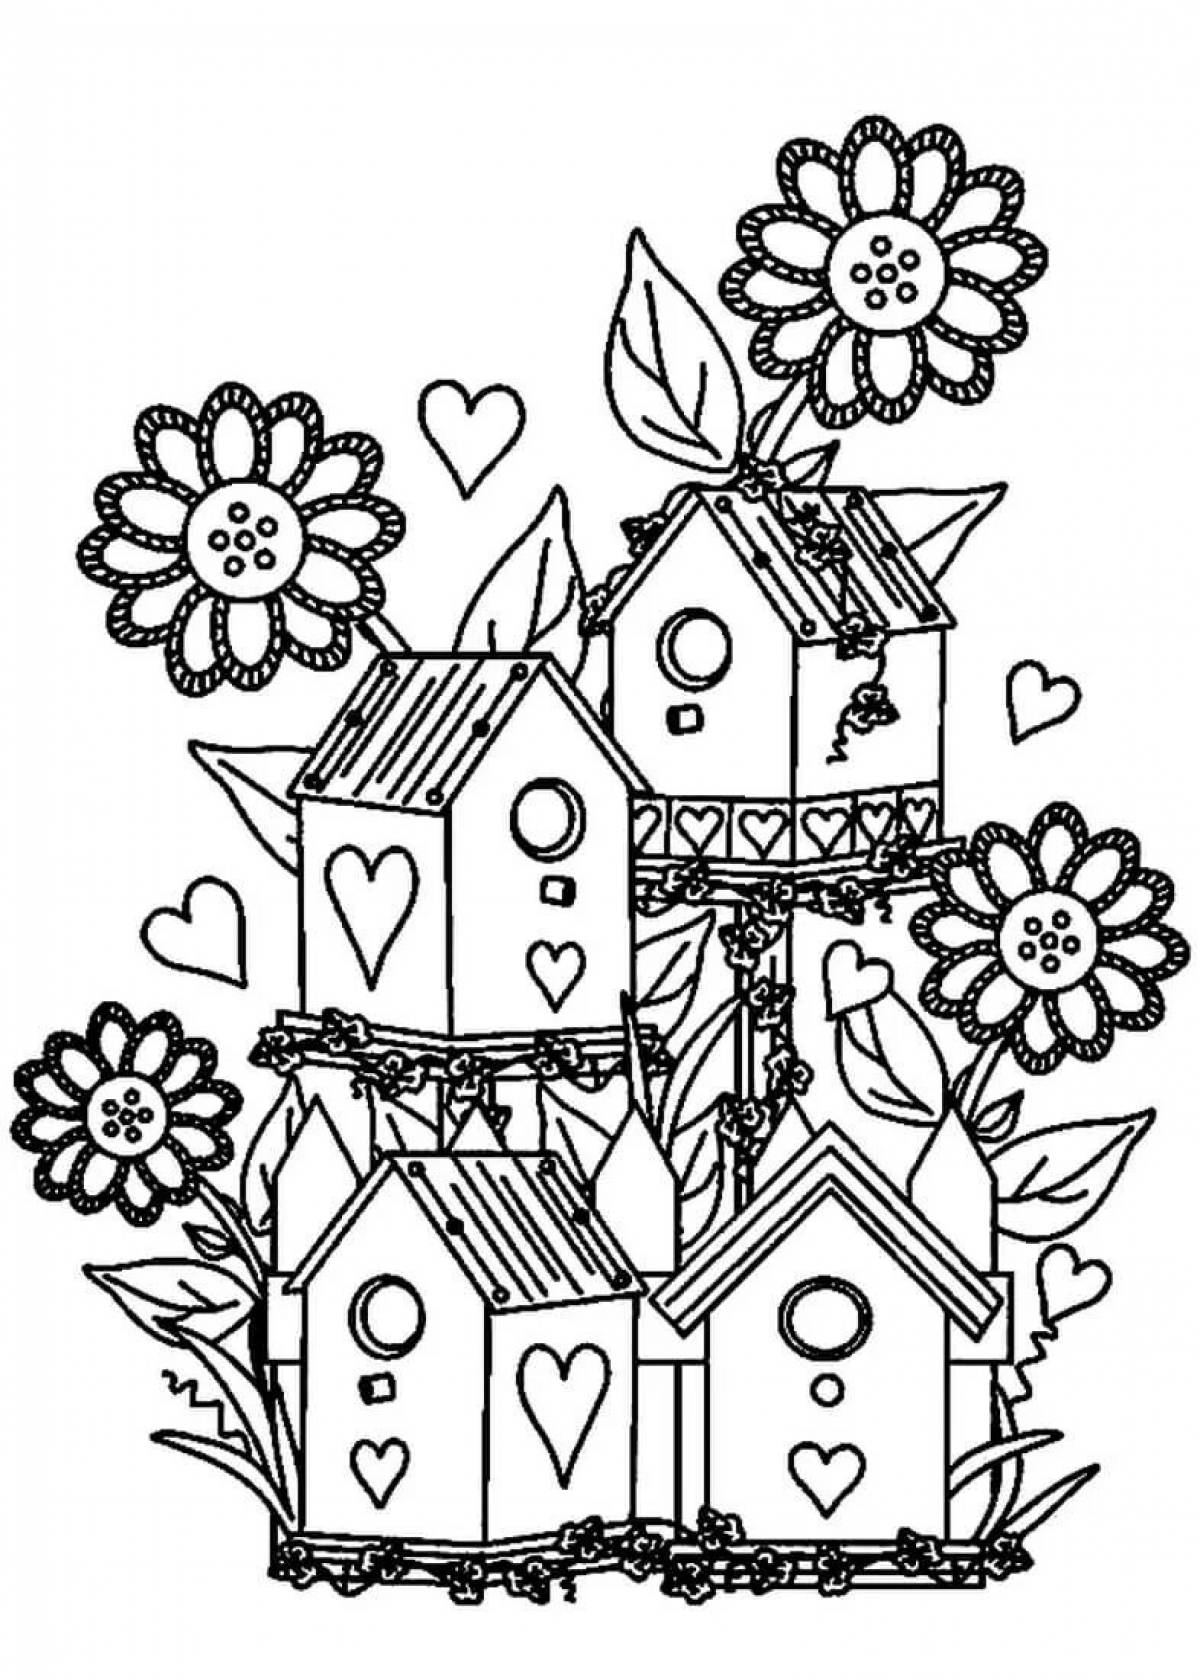 For girls houses and flowers #5